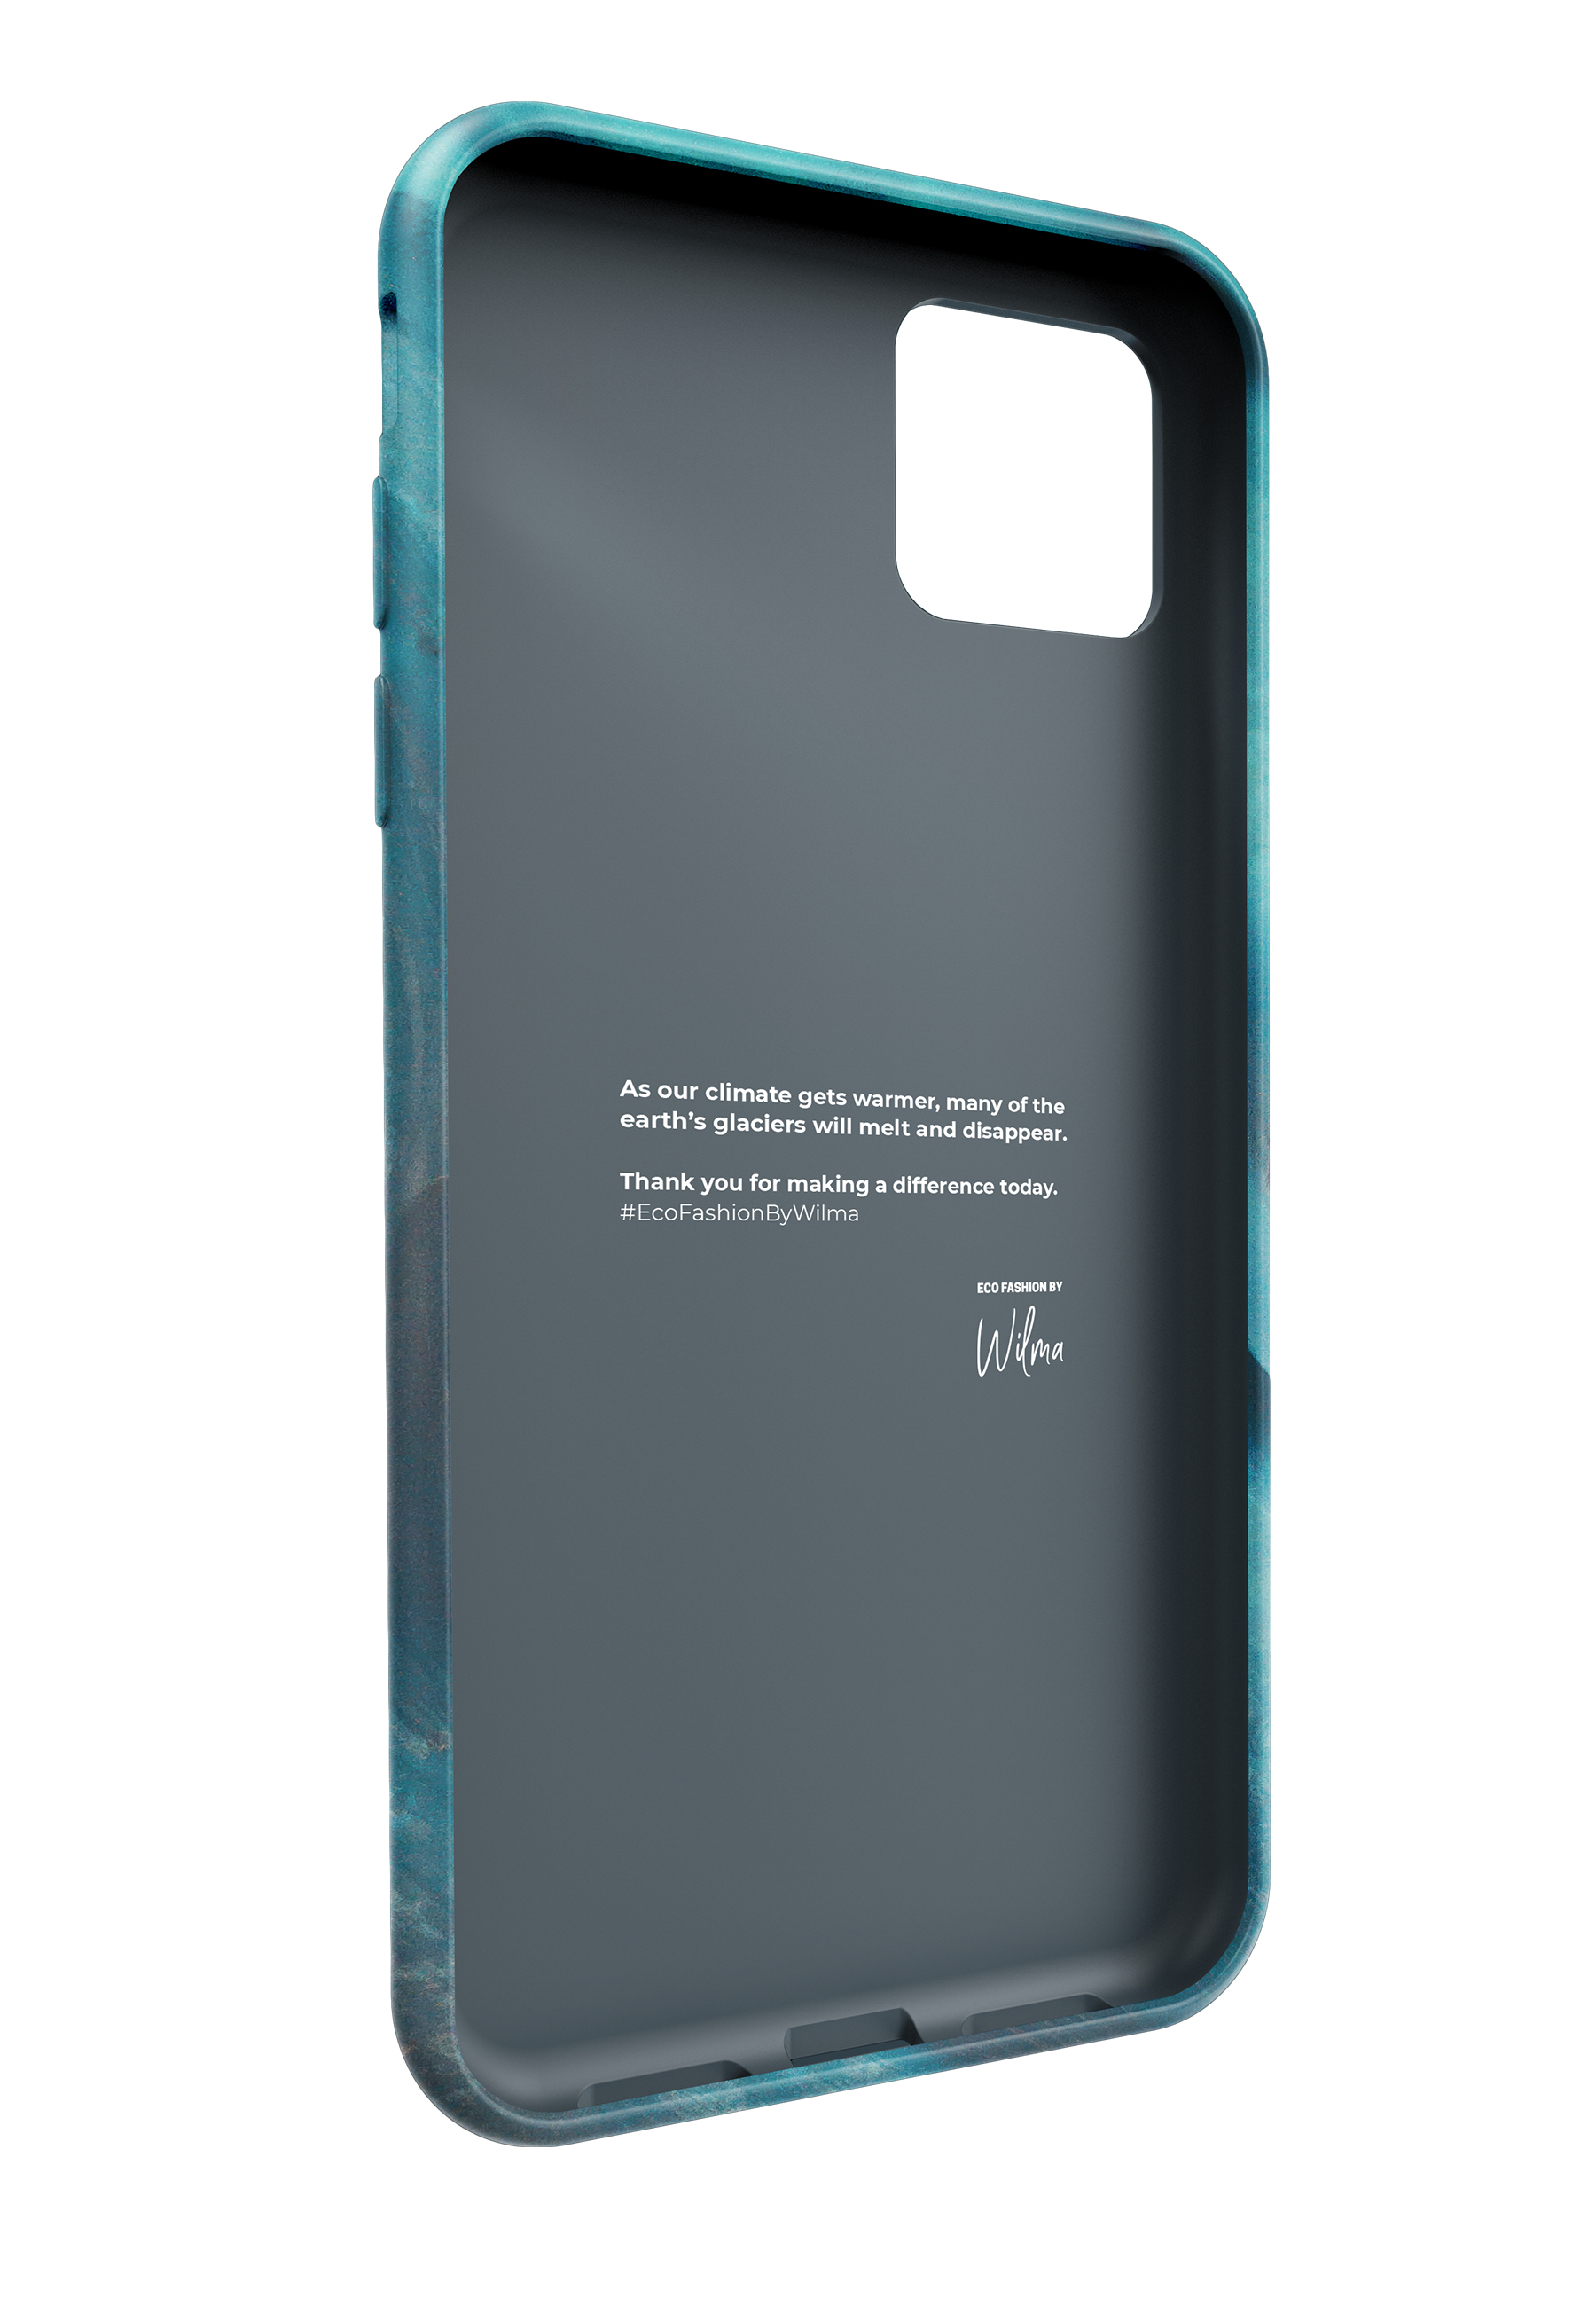 ECO FASHION iPhone Backcover, BY 11, WILMA Apple, blue _IP11